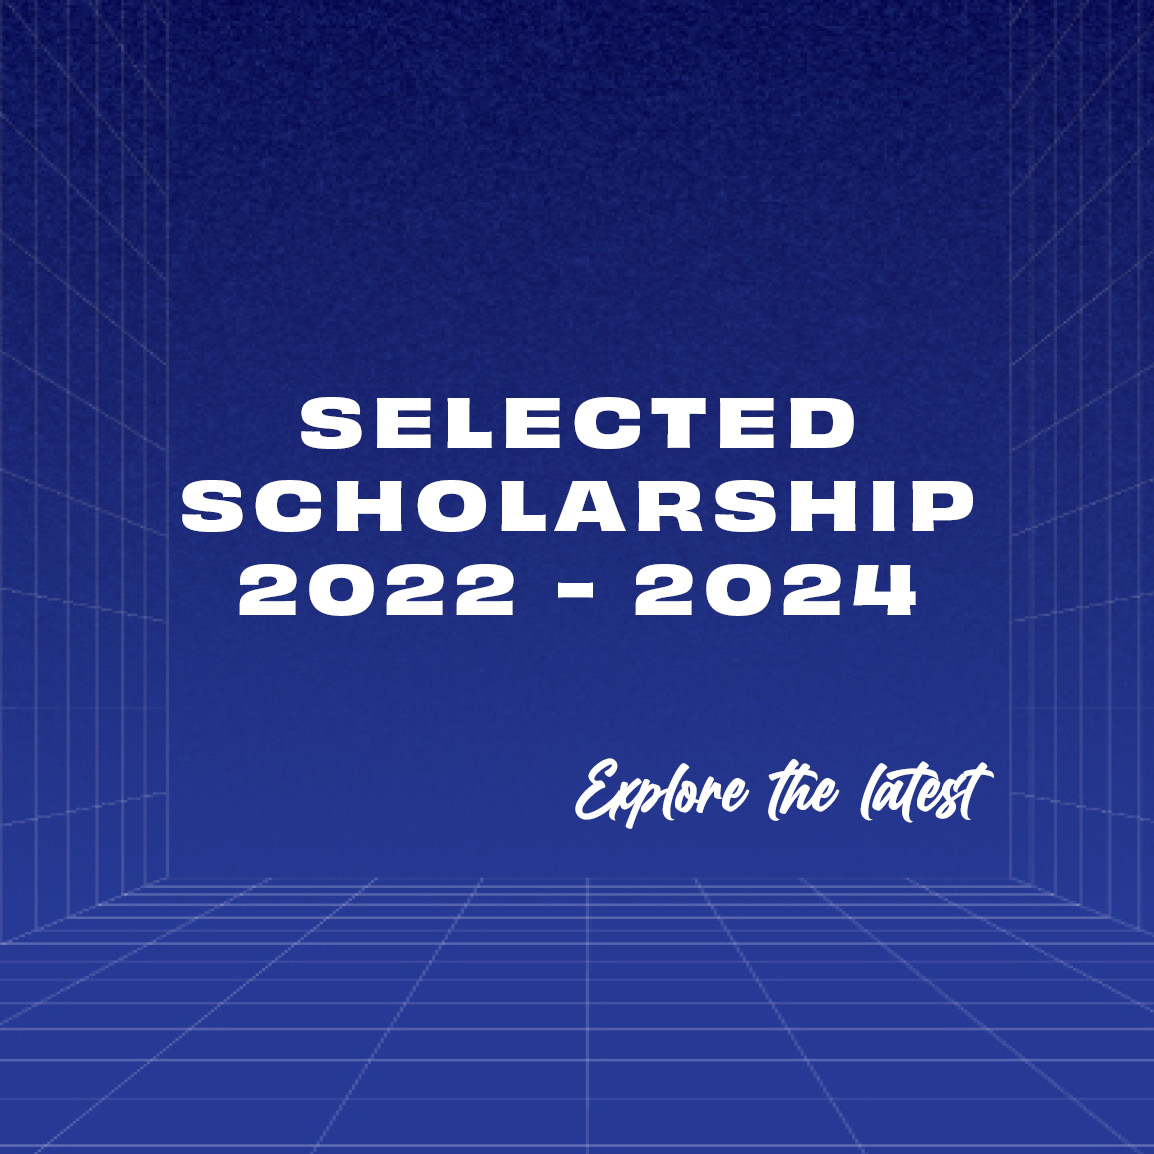 Selected Scholarship 2022-2024- Explore the latest